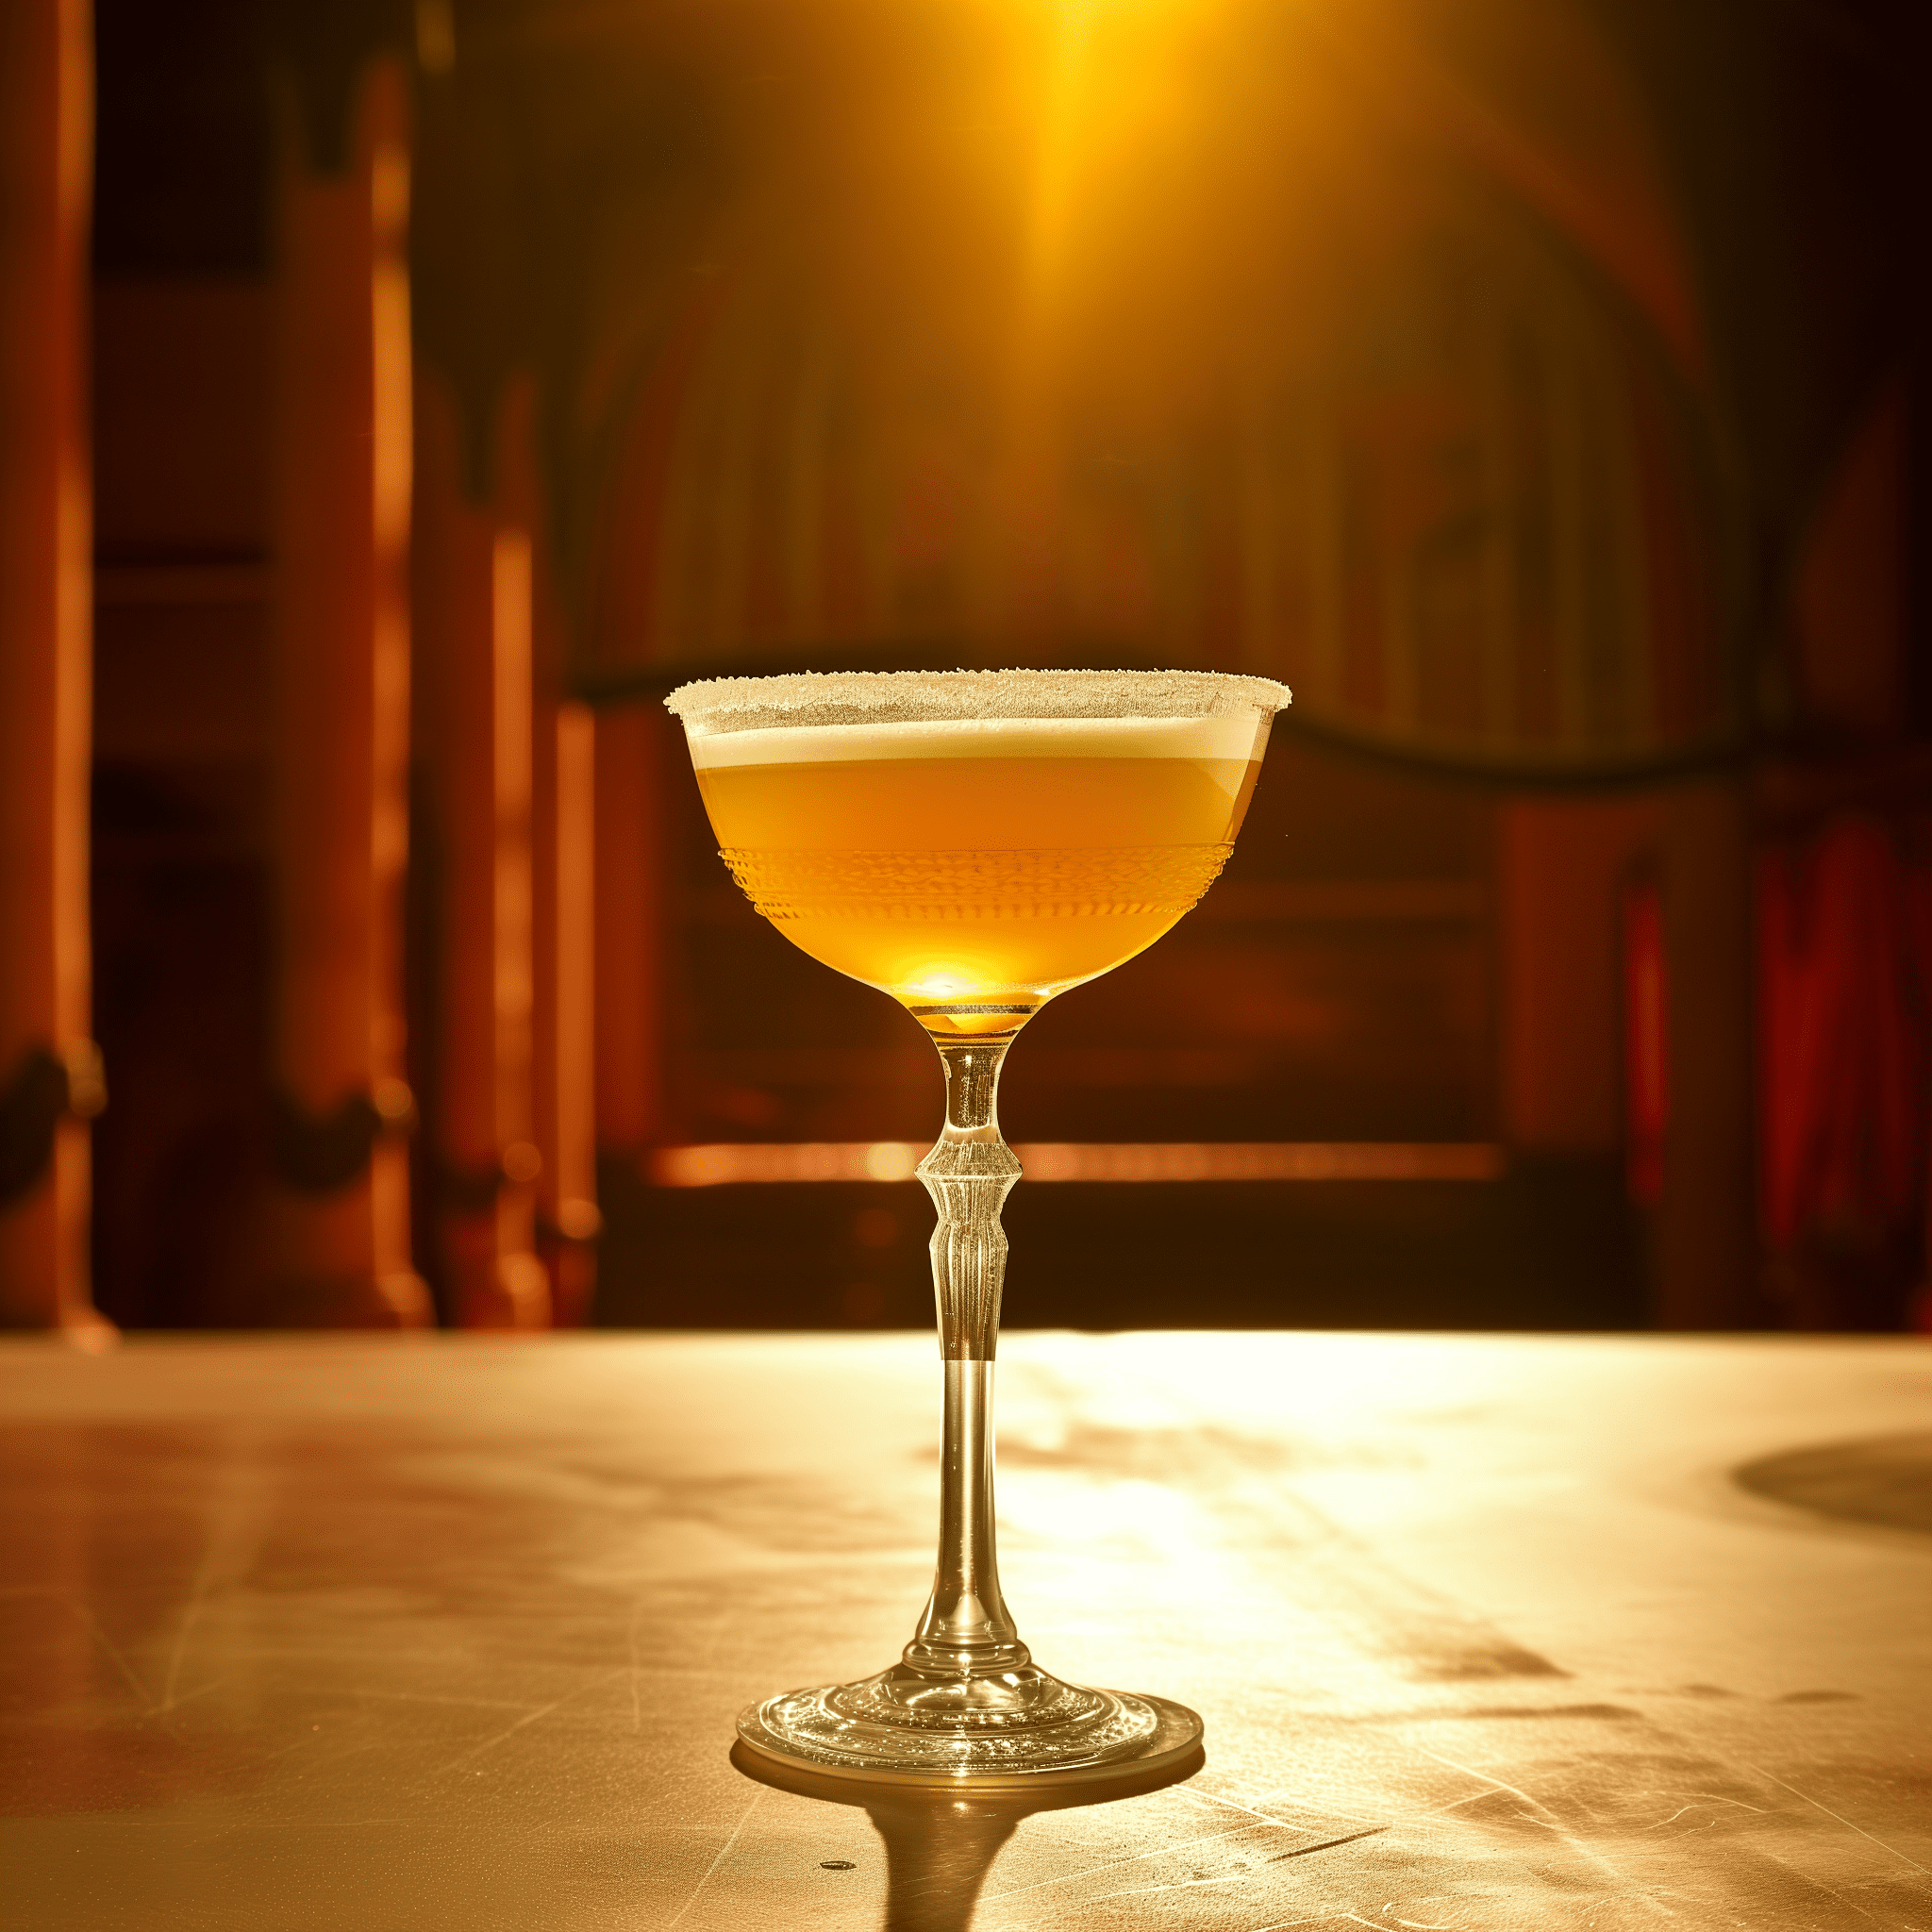 Toreador Cocktail Recipe - The Toreador is a harmonious blend of sweet and sour, with a robust tequila backbone. The apricot brandy adds a fruity sweetness that complements the sharpness of the lime juice, creating a cocktail that's both refreshing and complex.